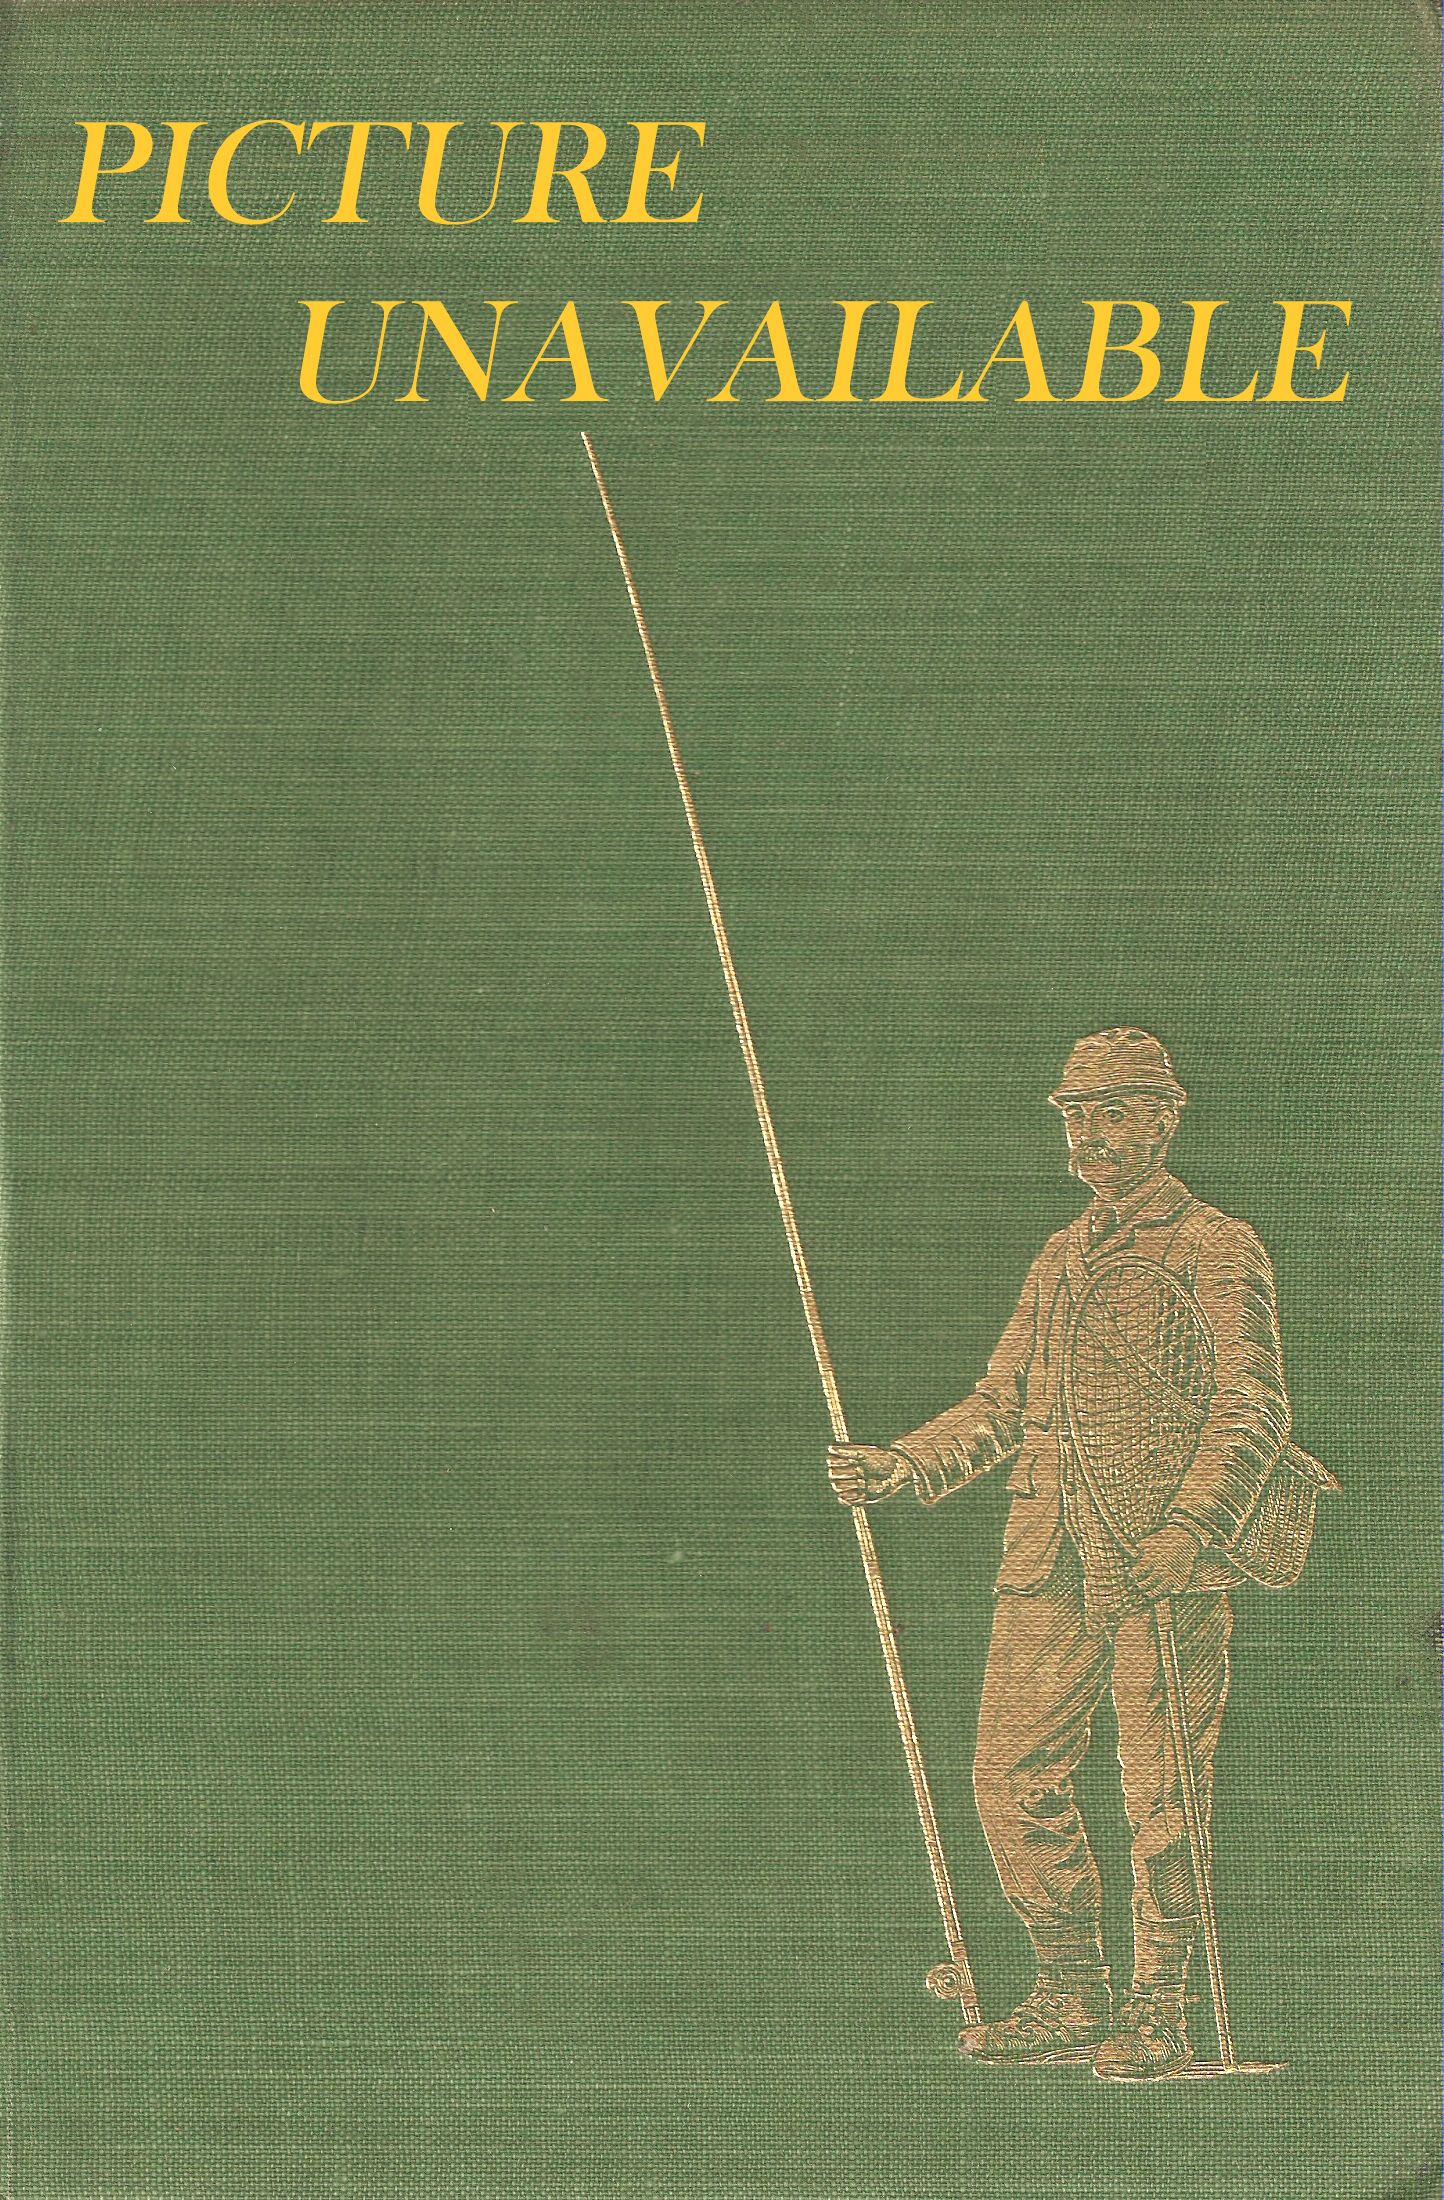 WEST COUNTRY FLY FISHING: An anthology edited by Anne Voss Bark. 1983  first edition.